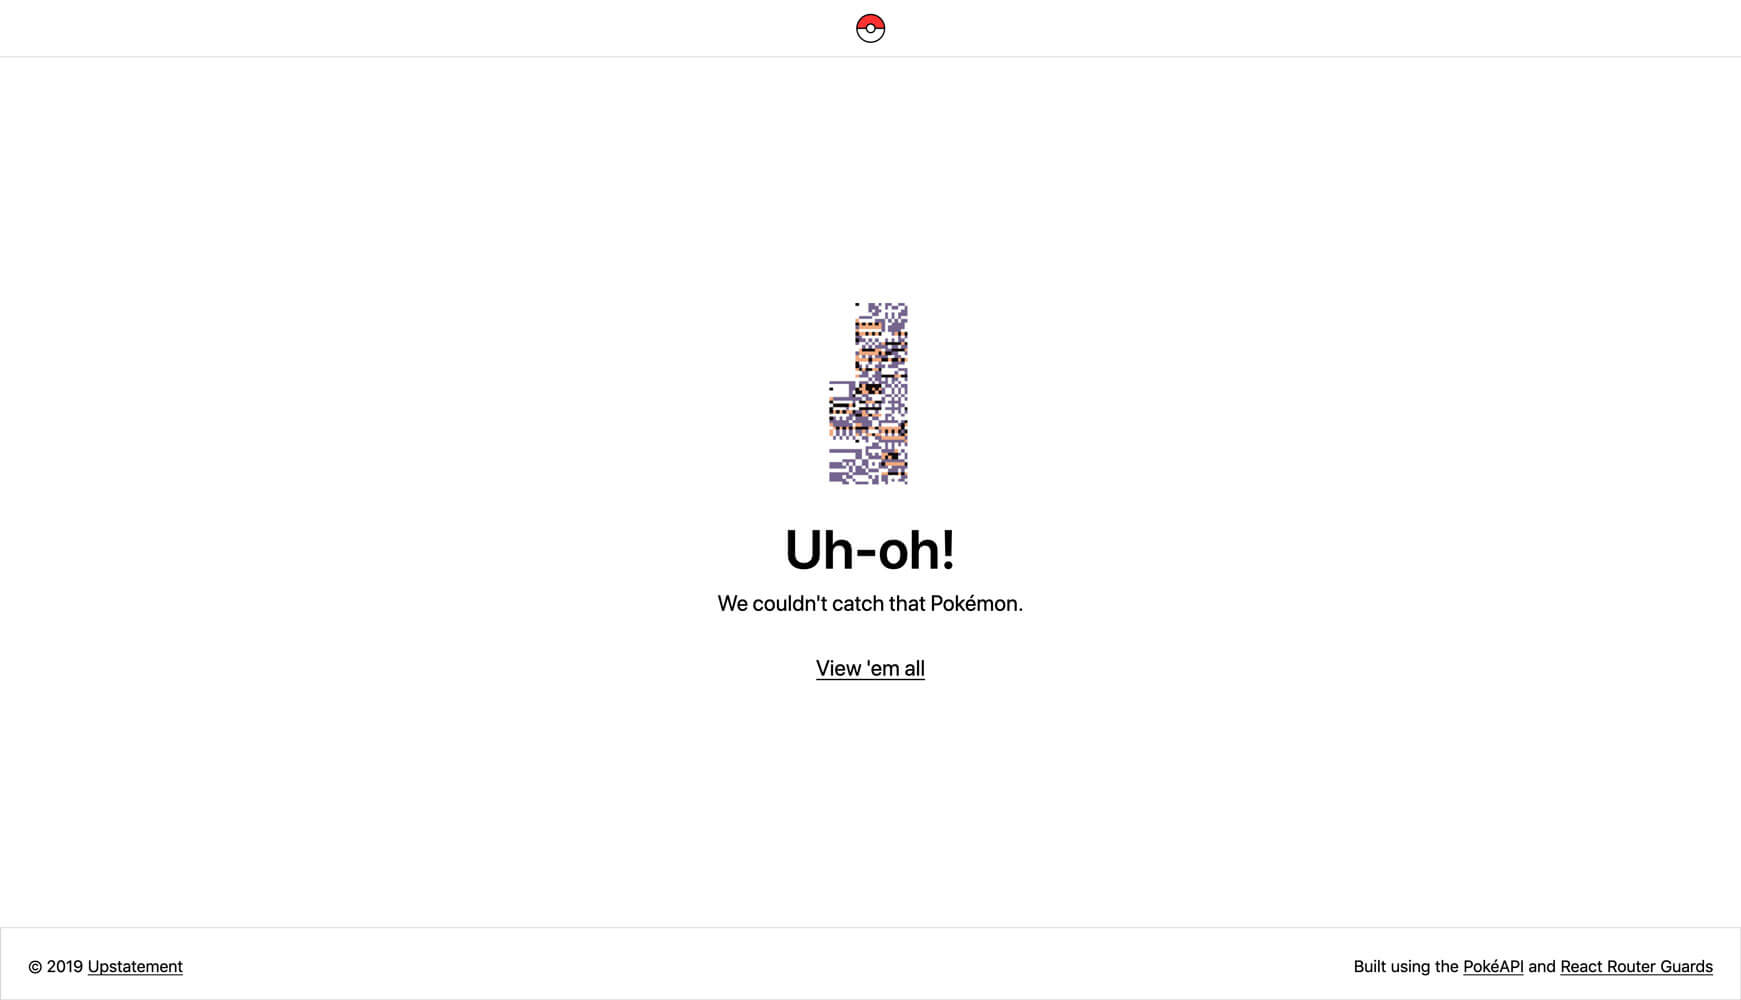 An image of the MissingNo Pokémon appears above text that reads "Uh-oh! We couldn't catch that Pokémon."